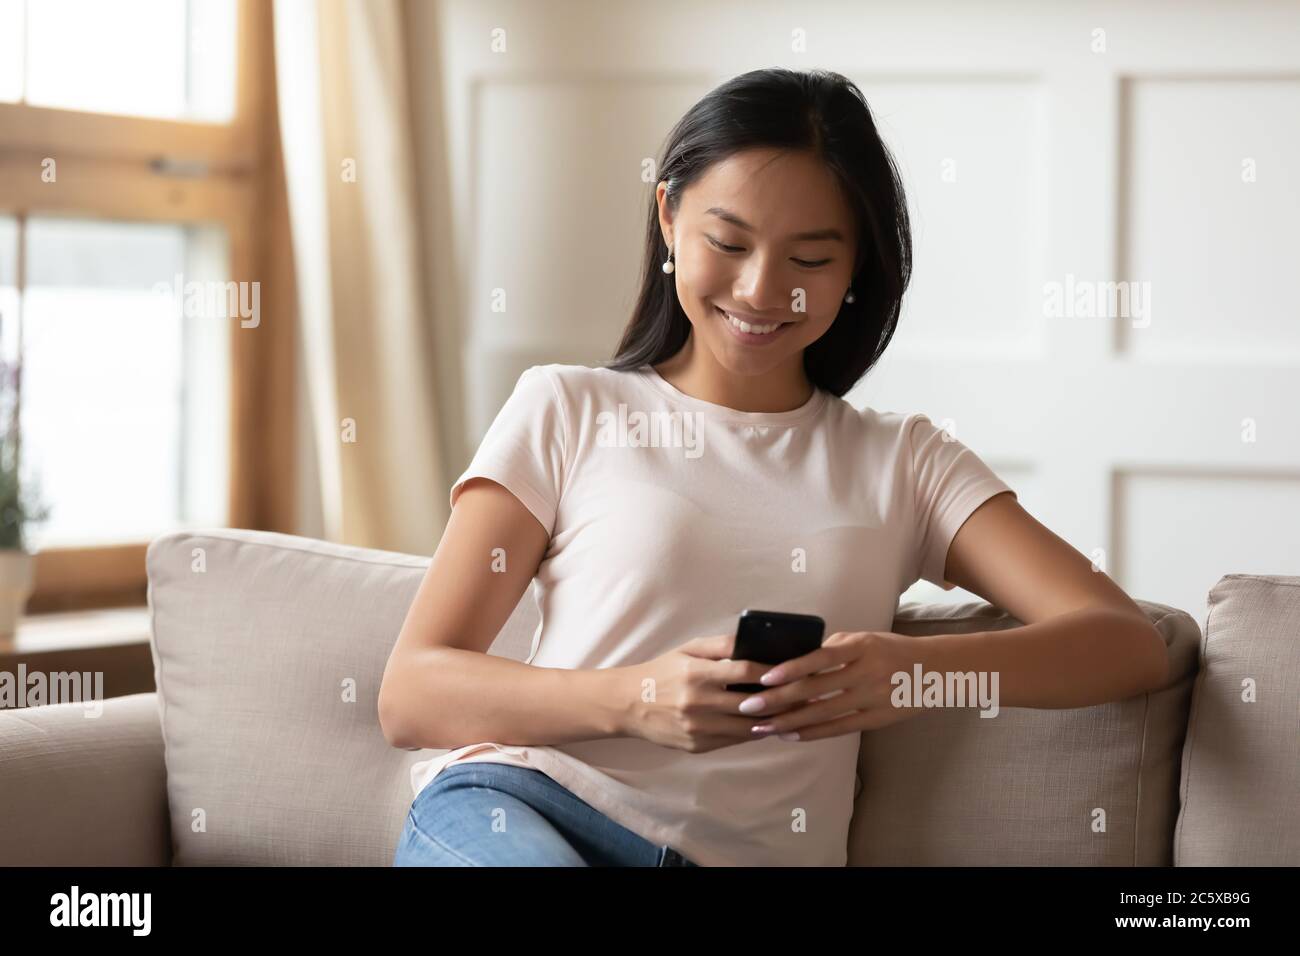 Smiling young vietnamese woman using mobile applications. Stock Photo